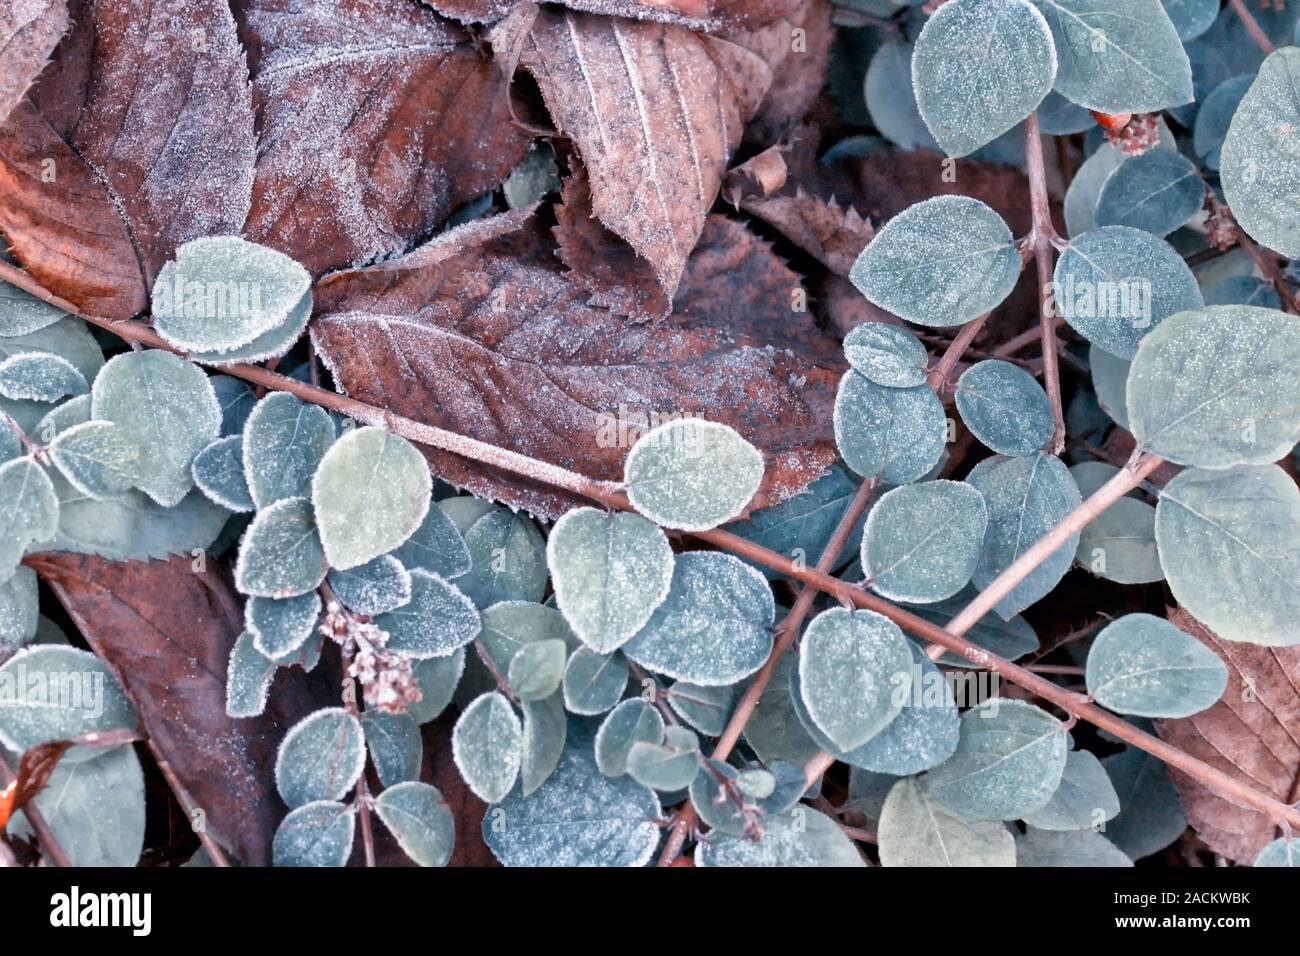 Background mixed with frozen european beech leaves (Fagus sylvatica) and cotoneaster branches Stock Photo